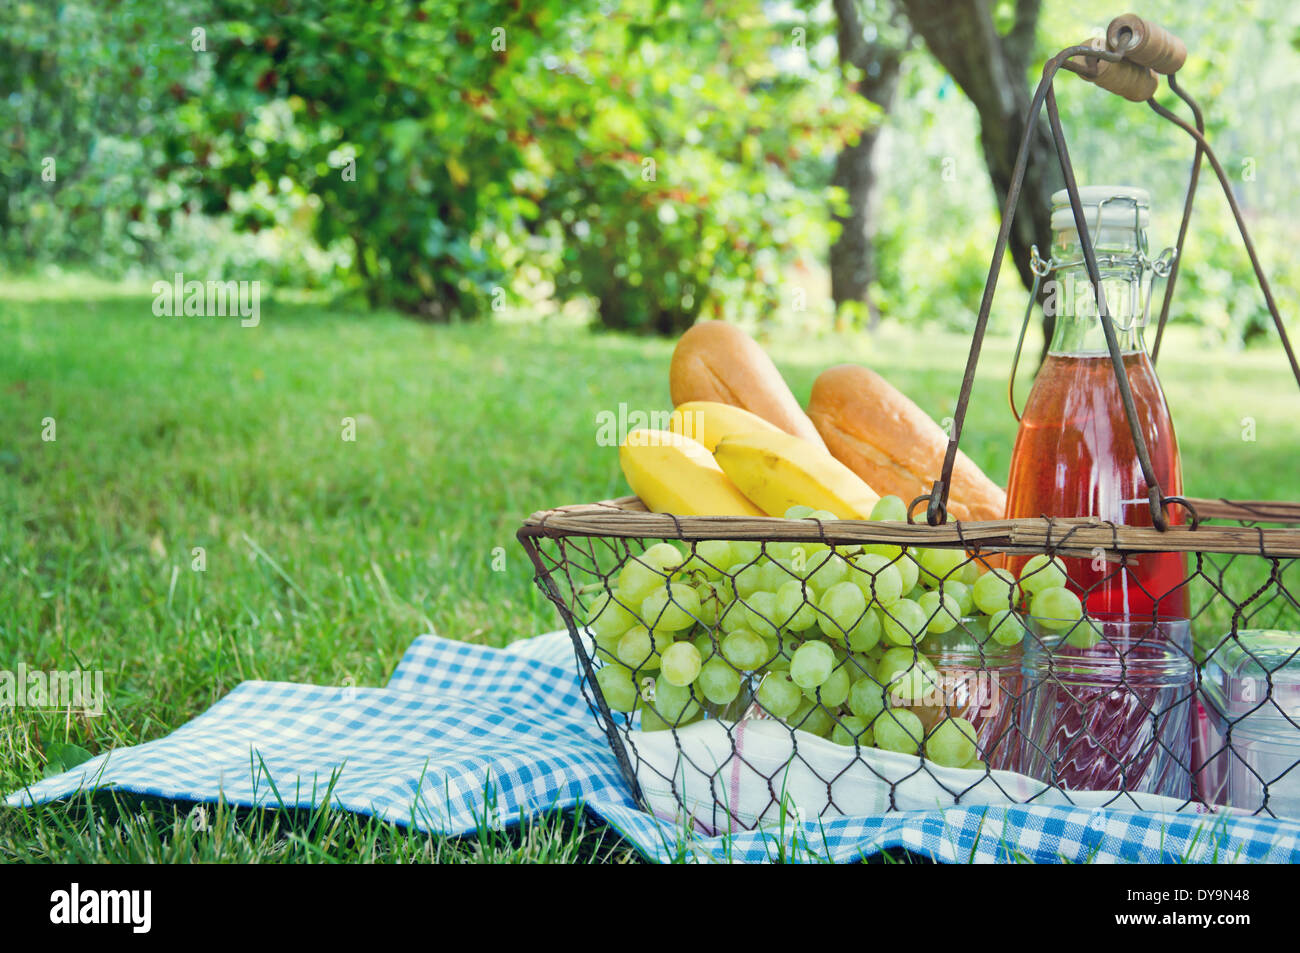 Vintage picnic basket with fruit, bread and juice on blue blanket in a green summer garden Stock Photo